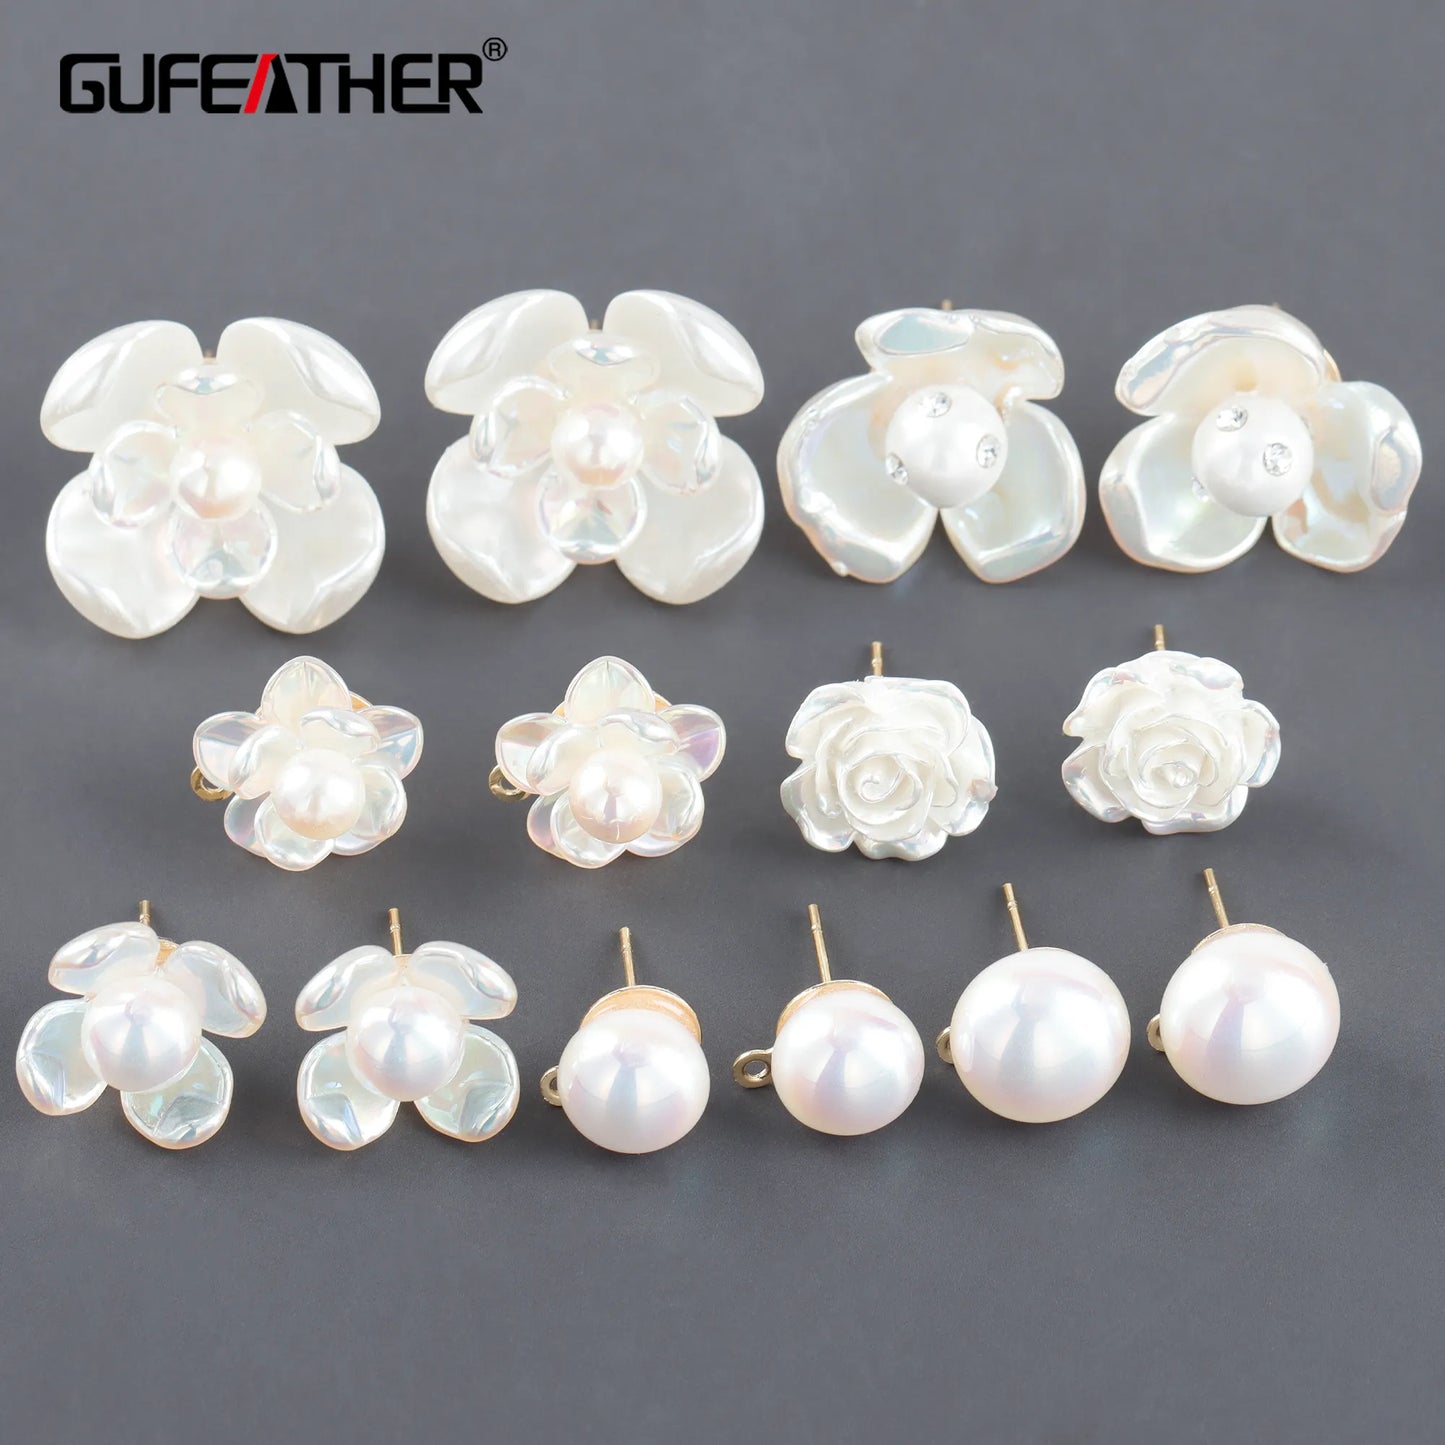 GUFEATHER MA07,jewelry accessories,18k gold plated,copper metal,plastic pearl,charms,diy earrings,jewelry making,10pcs/lot